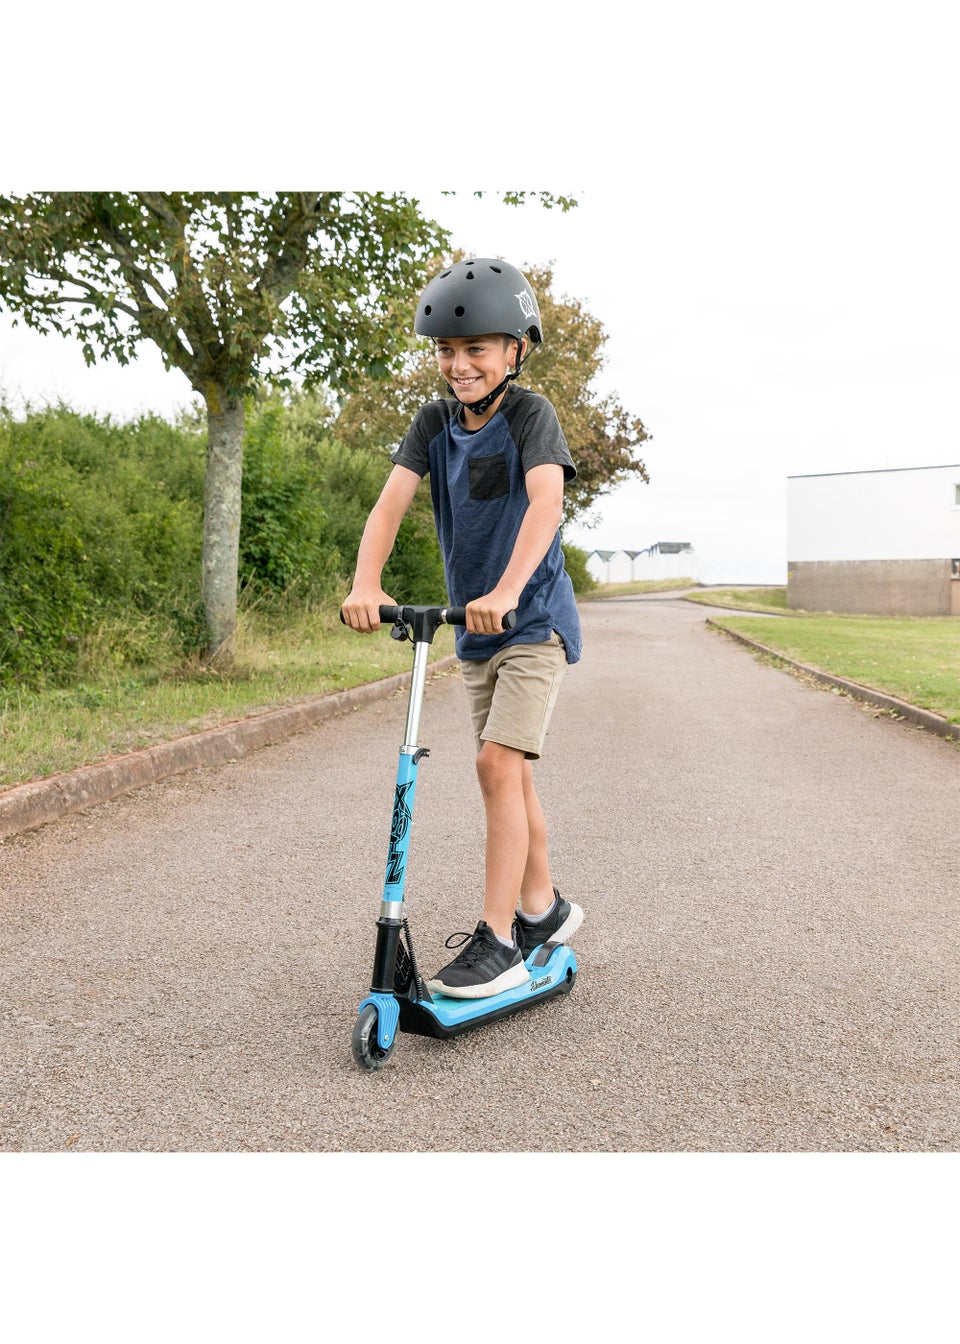 Xootz Element Electric Scooter